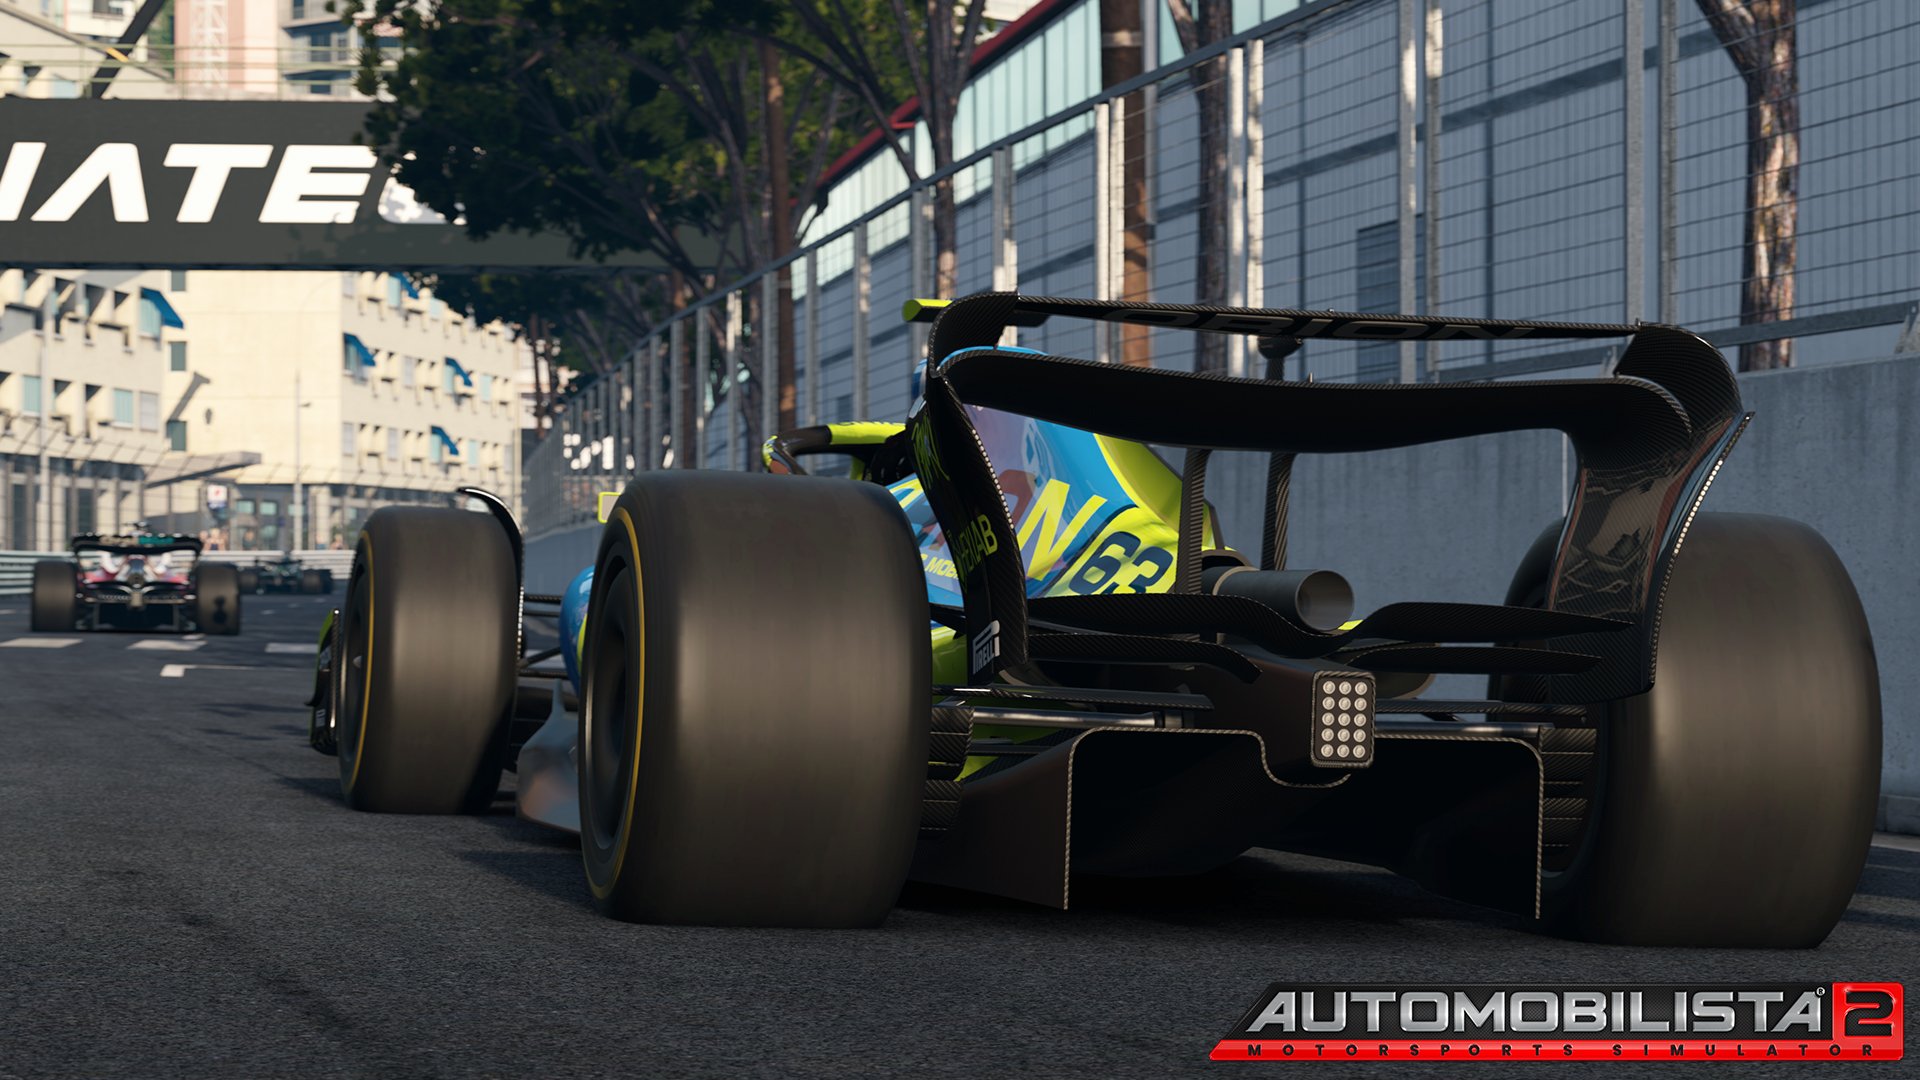 More information about "Automobilista 2 v1.3.5.0 Release Candidate disponibile"